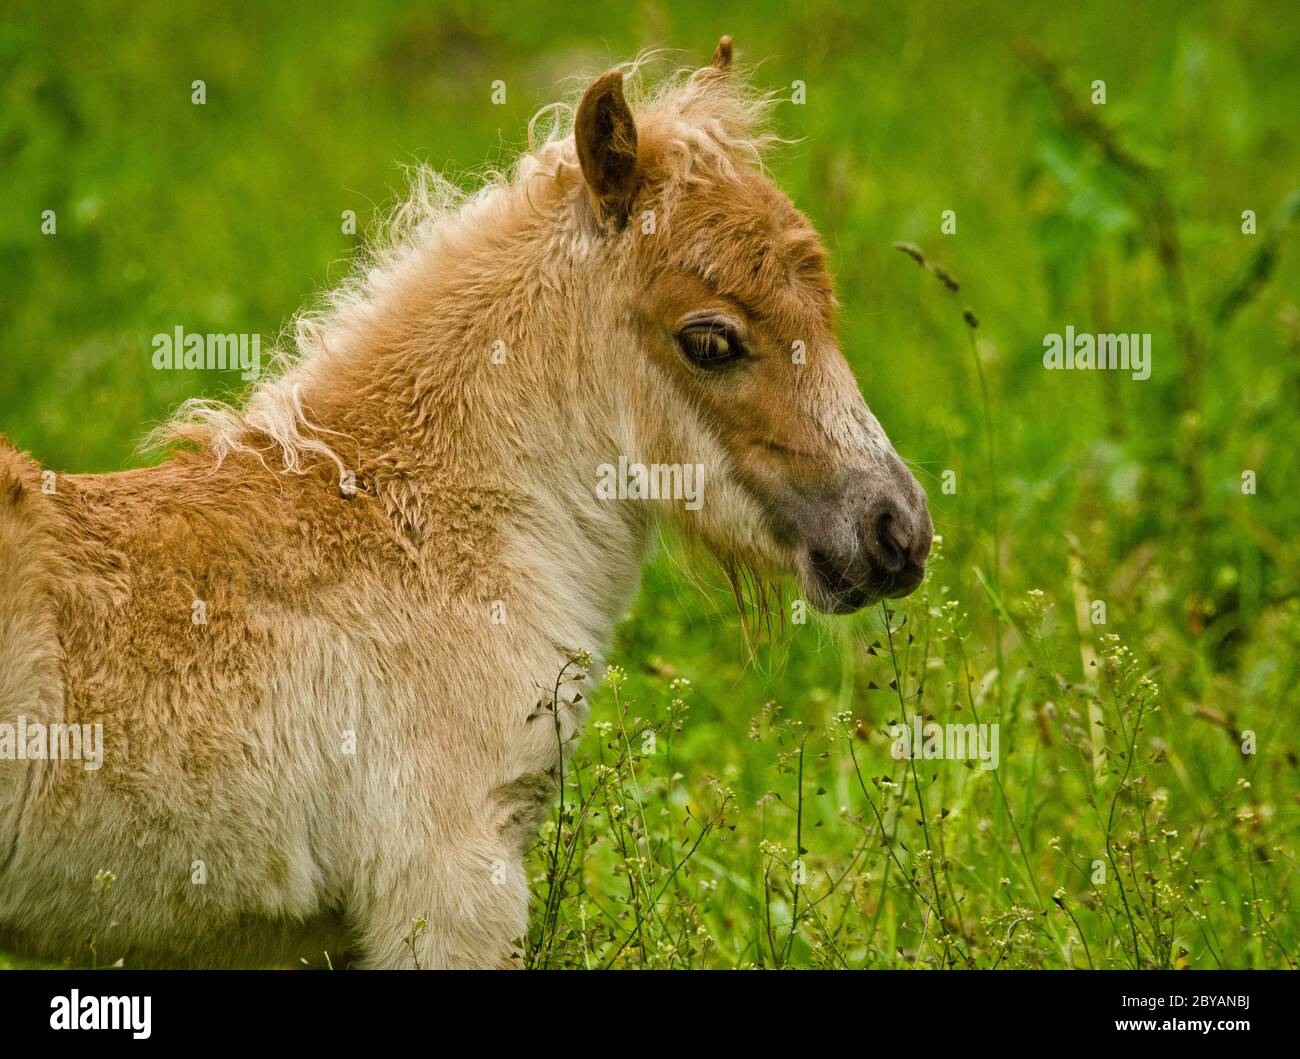 A newborn small chestnut foal of a shetland pony is tasting a little bit of grass, a cute and georgous portrait Stock Photo